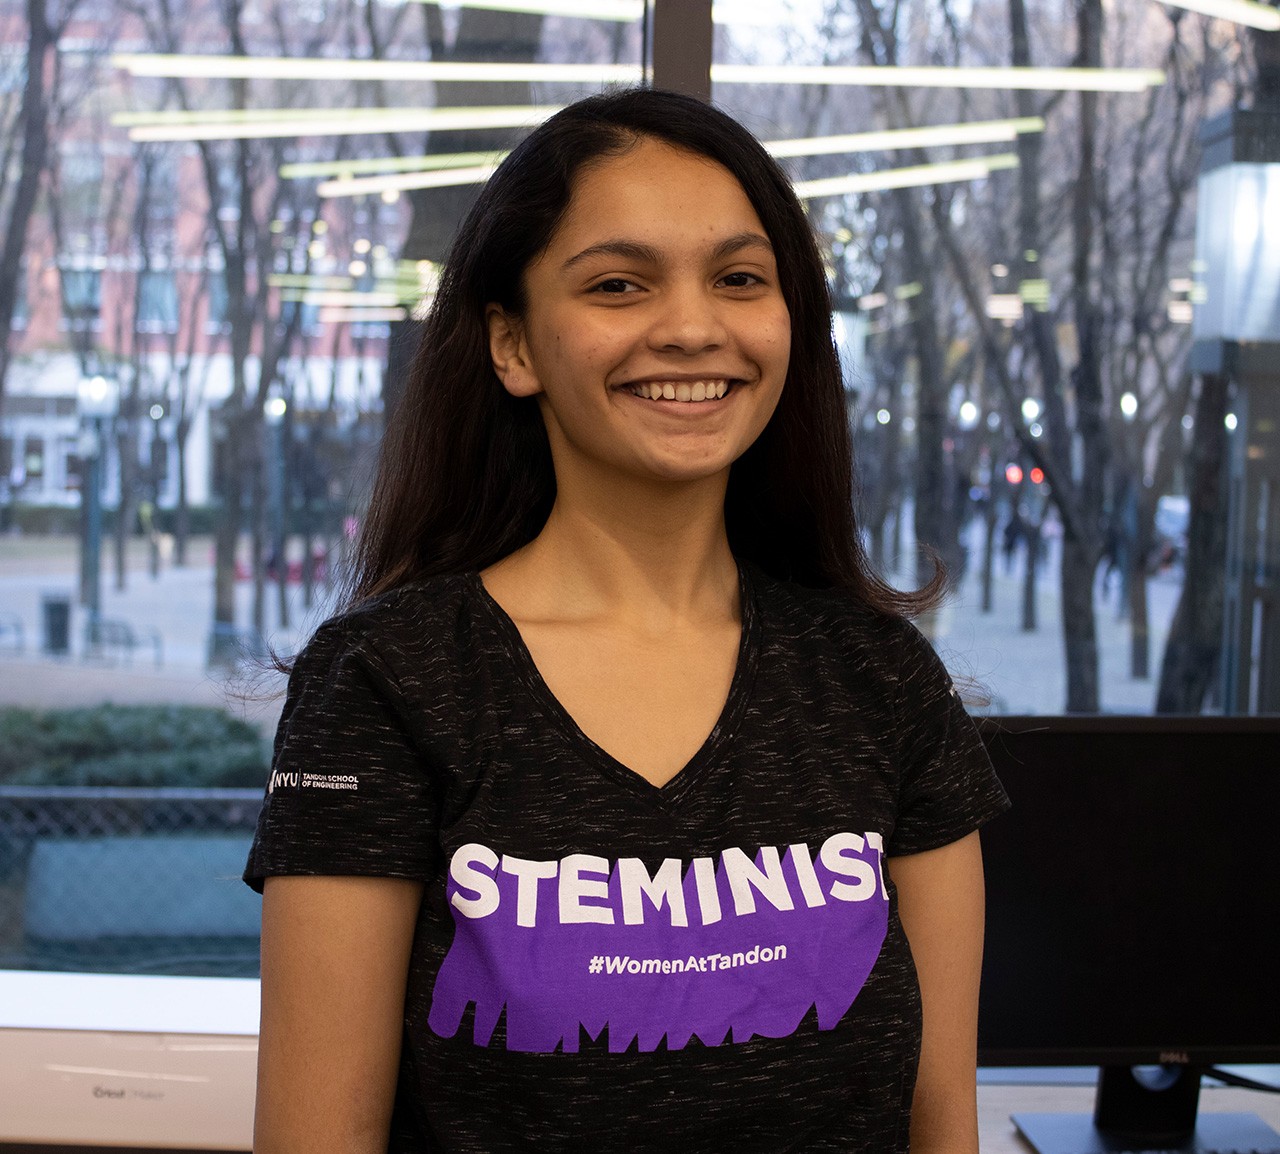 A student, who is a member of STEMinist, smiling.